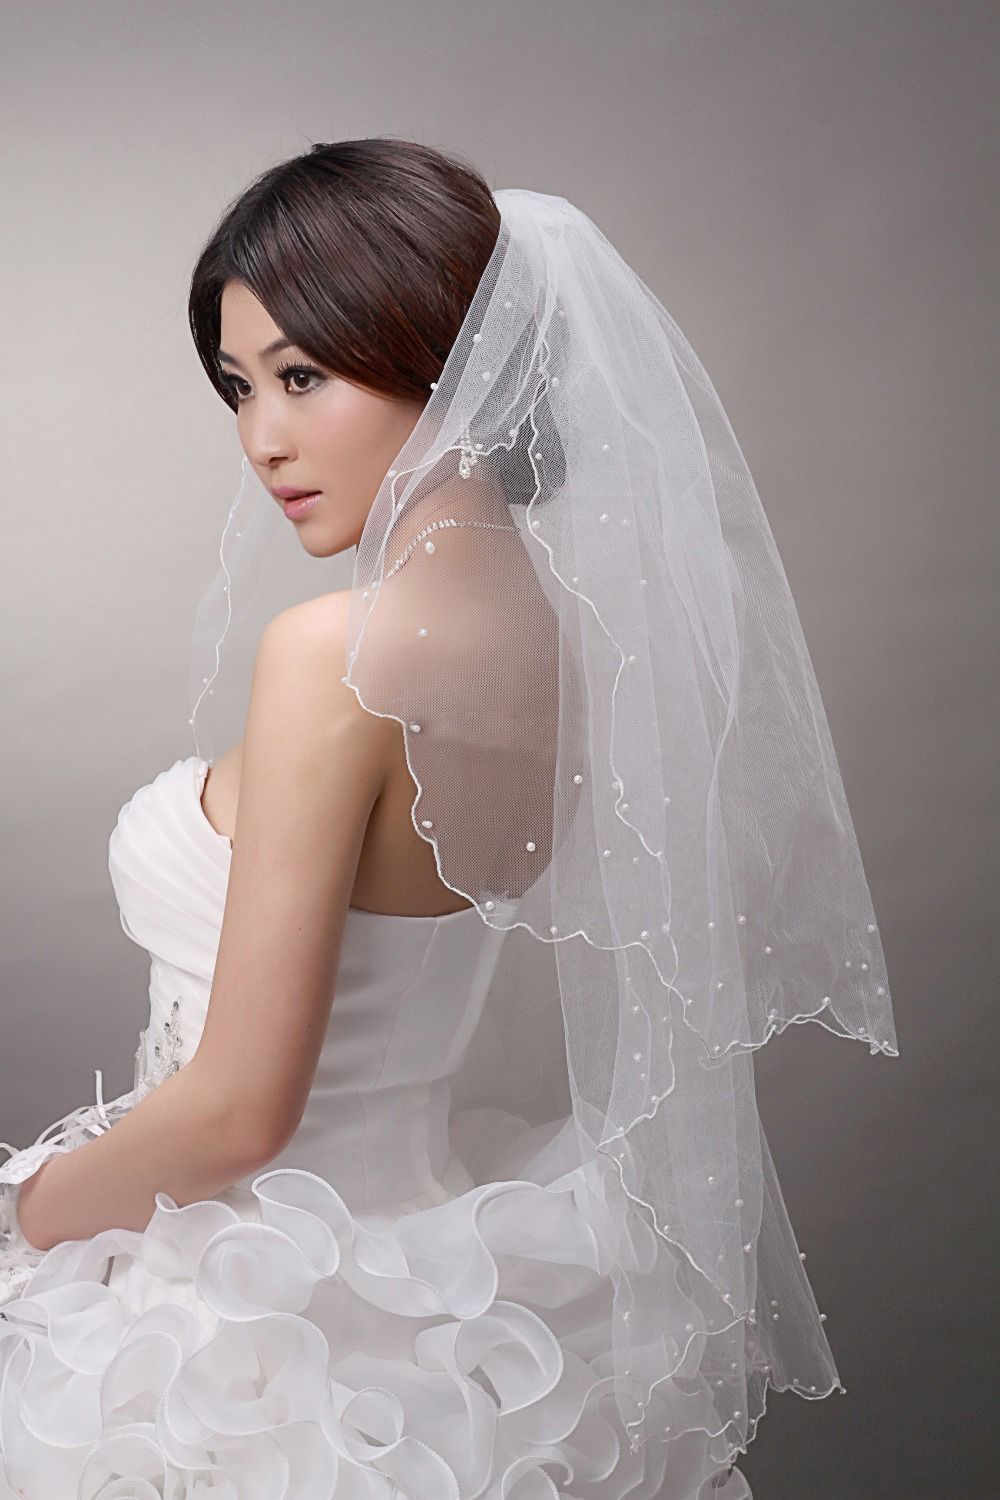 2019 Latest Design Fashion Pearls Short Bridal Veils 2 Layers Ivory White Tulle Wedding Veils Bridal Accessories Cheap